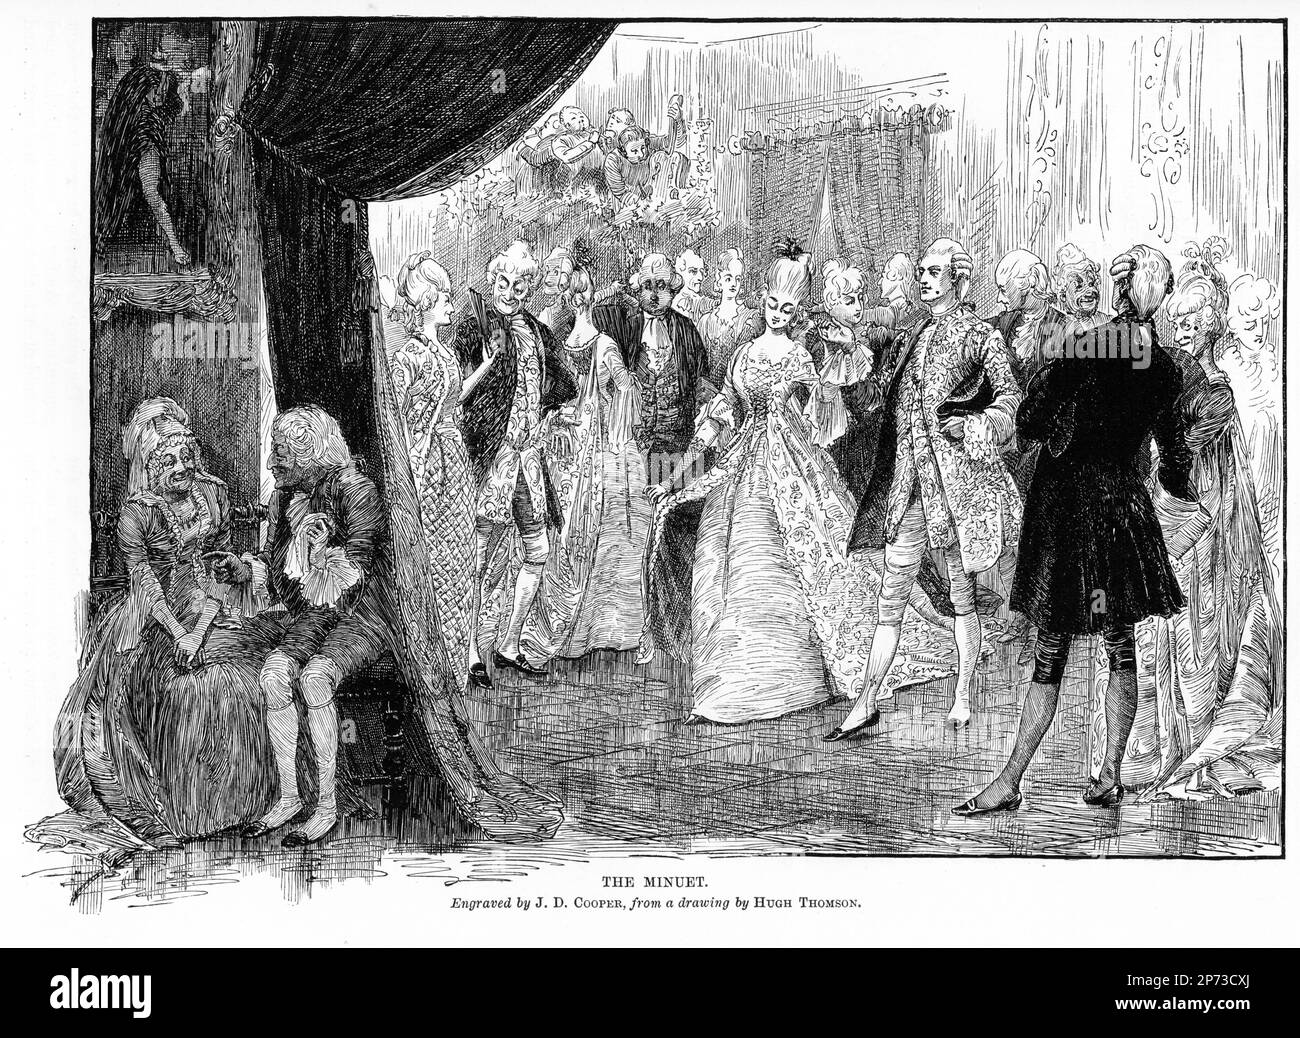 Engraving of people dancing The Minuet, published circa 1880 Stock Photo